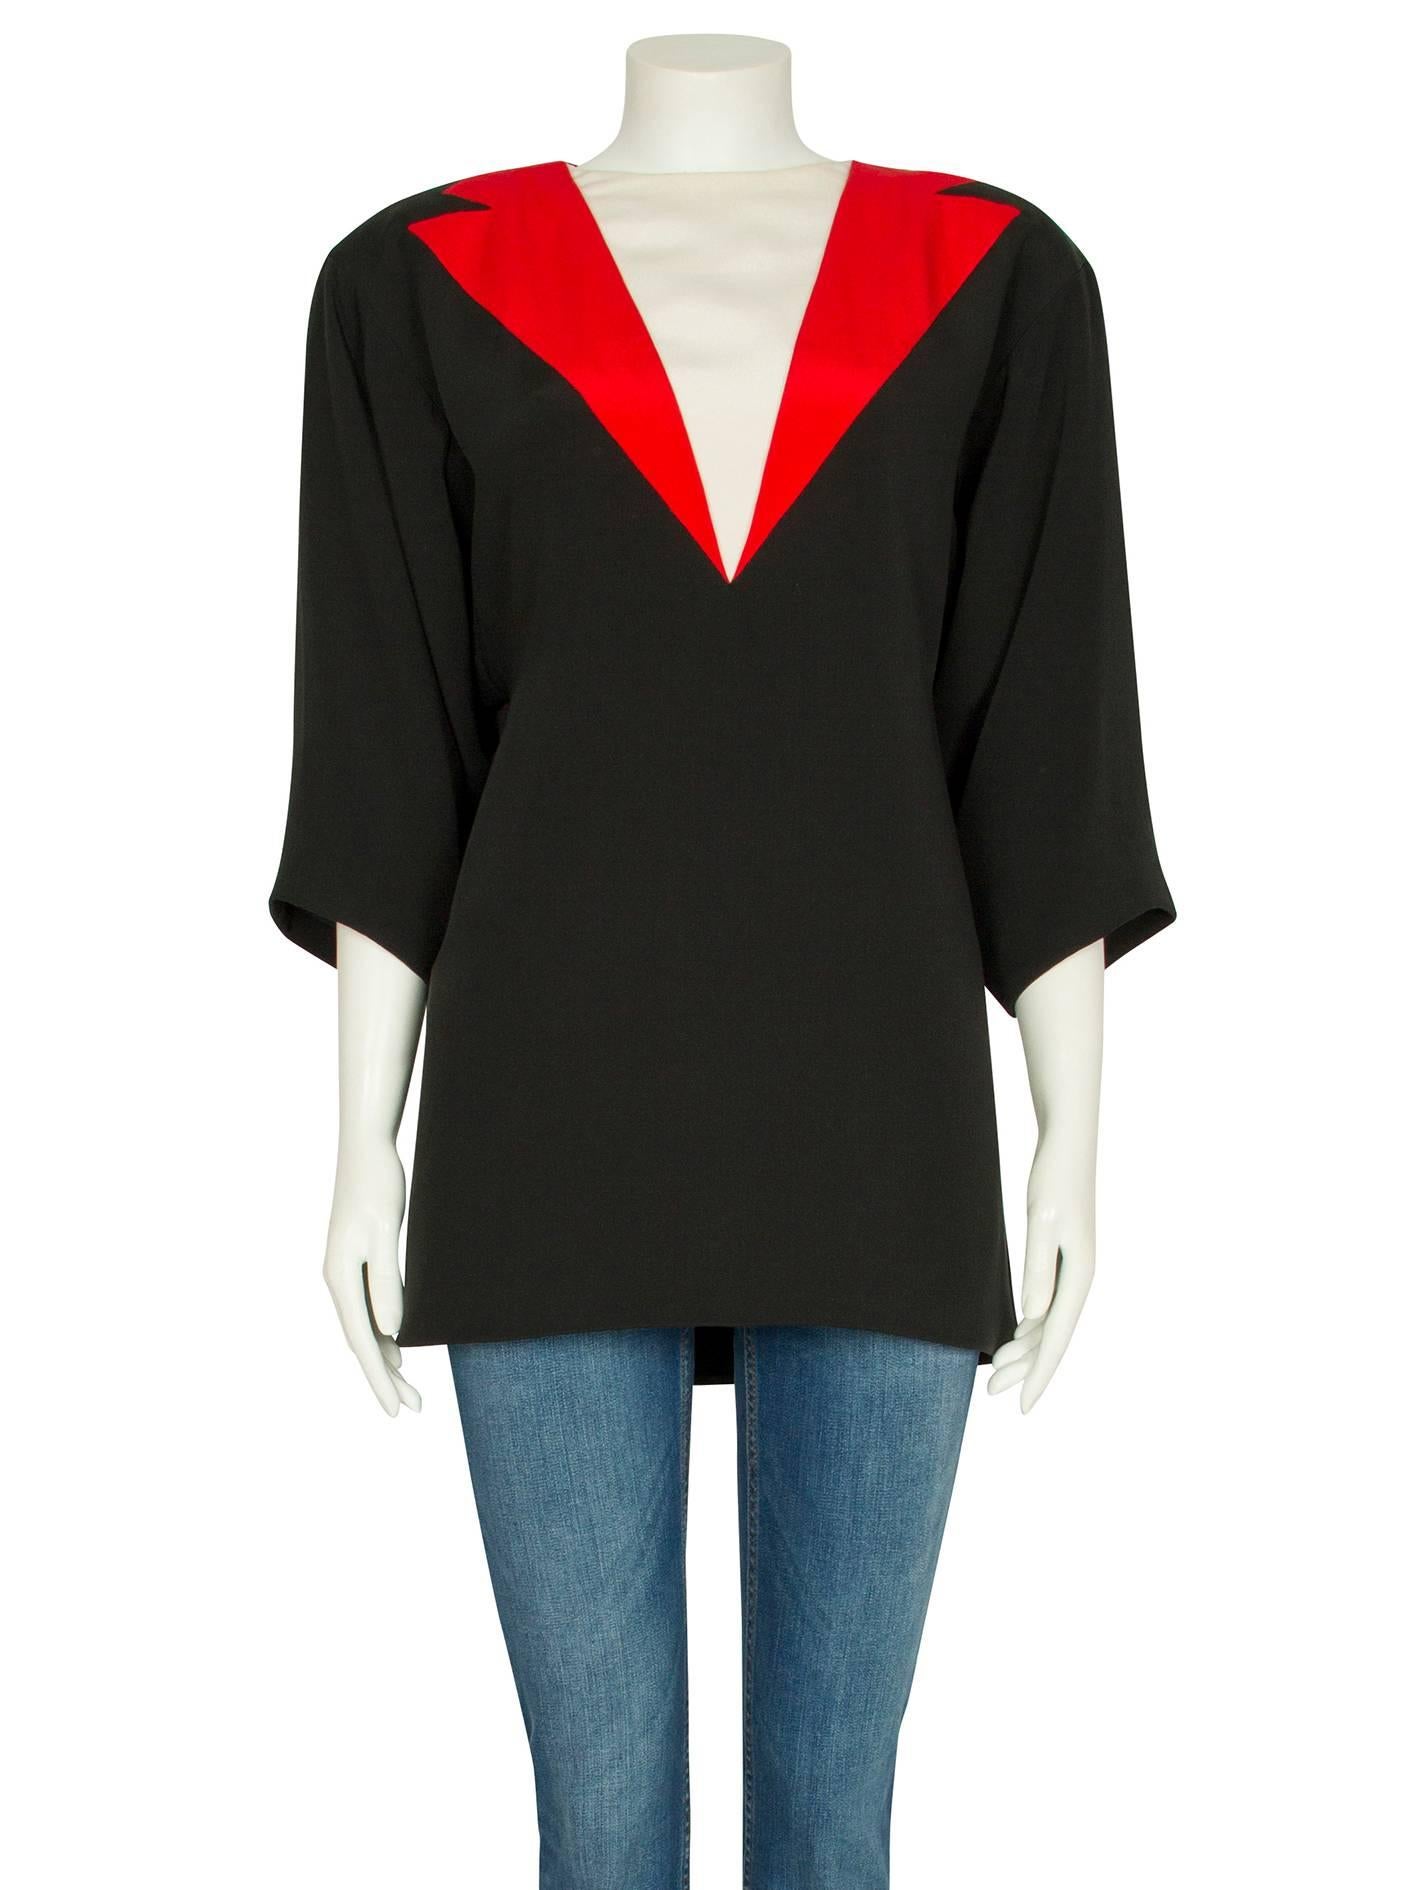 An unusual 1980s Dior Couture black silk tunic top with a red and ivory trompe l’oeil effect neckline. The loose-fitting boxy tunic features padded shoulders and drapey three-quarter-length sleeves, a long hemline and fastens at the back with a row